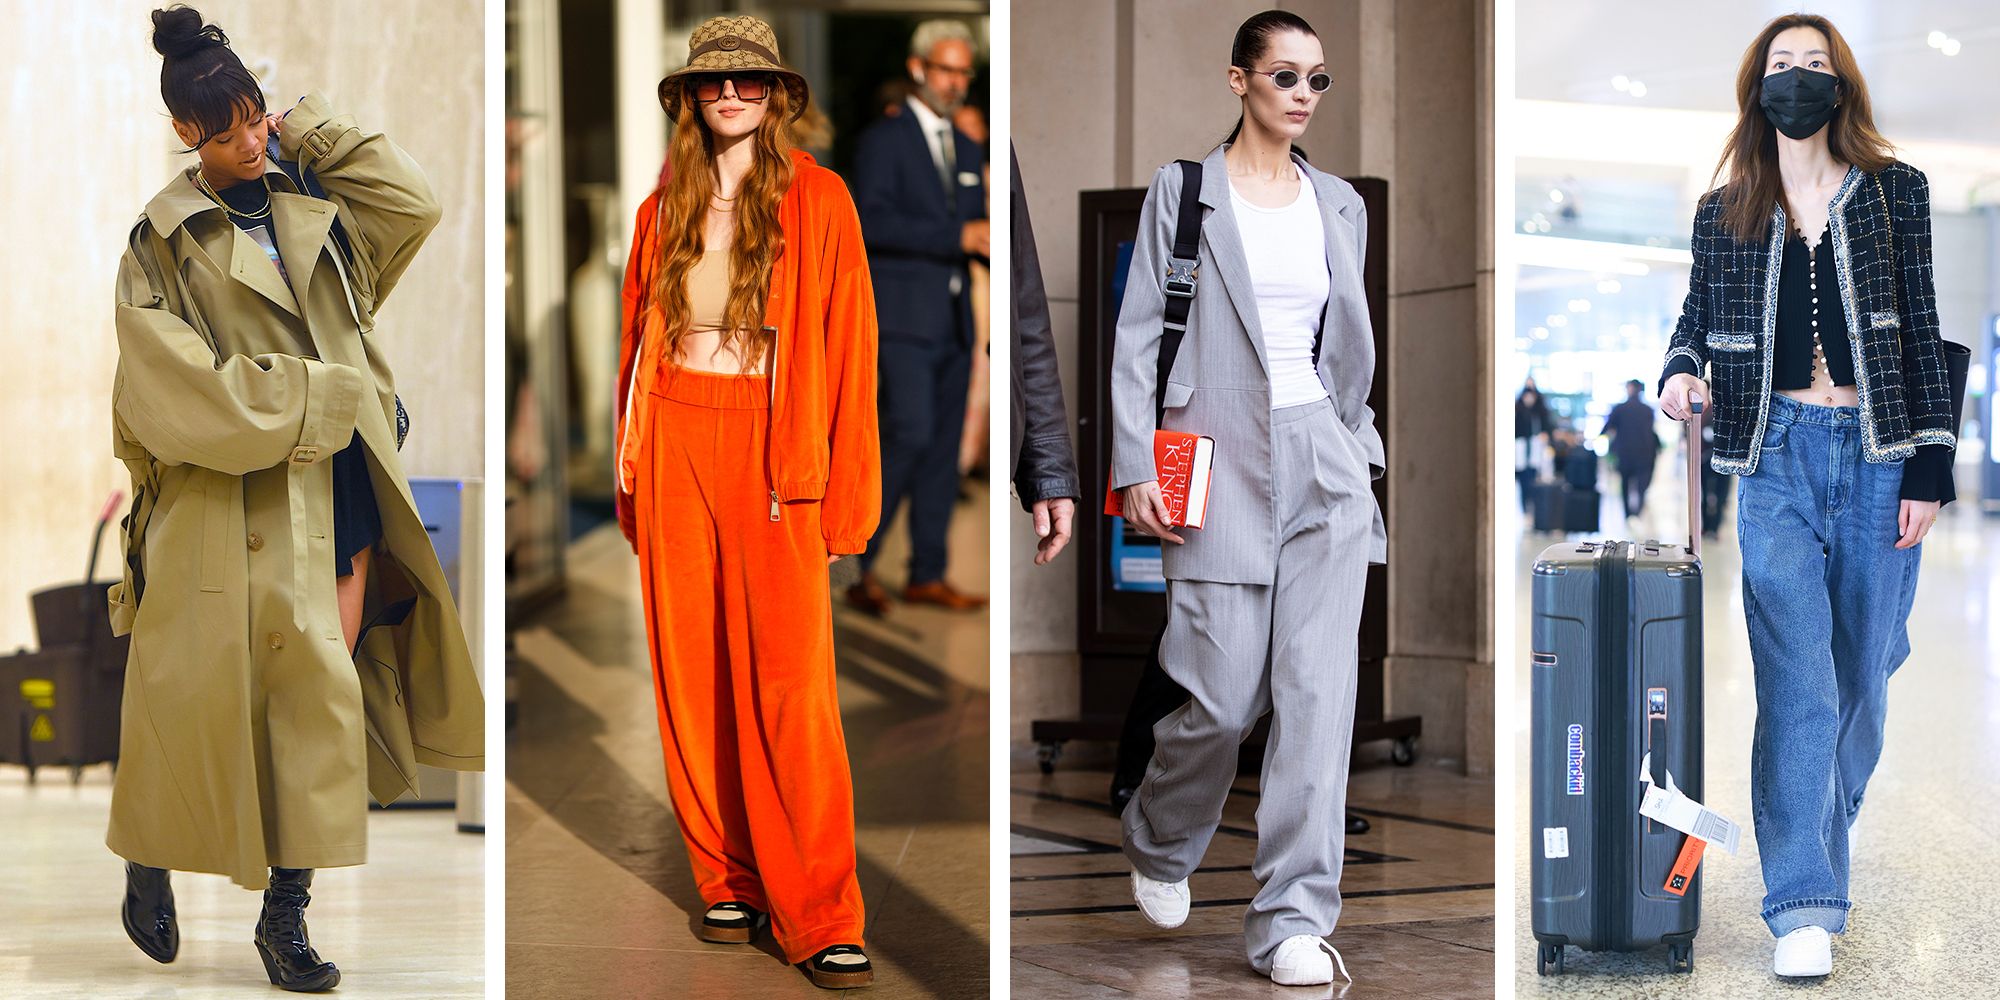 Soar The Skies In Style: Stylish Airport Outfit Ideas